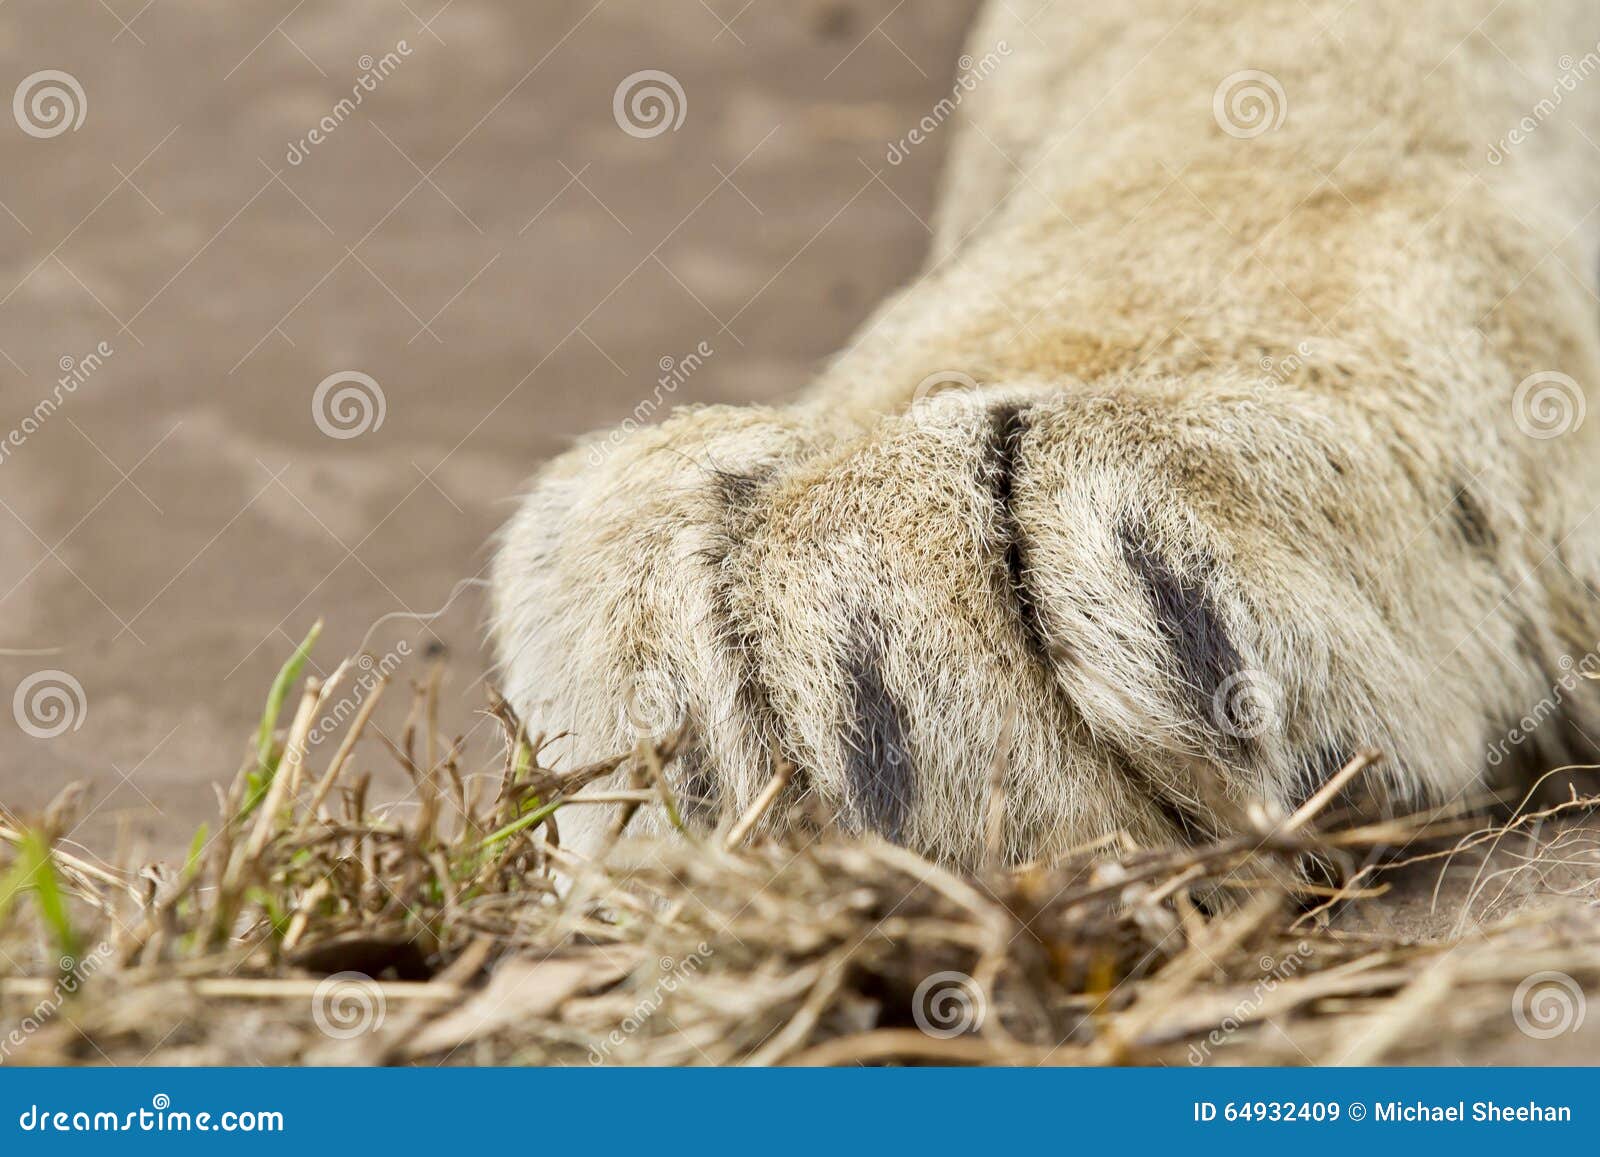 Large White  Lions Paw  Resting On Some  Grass Stock Image 